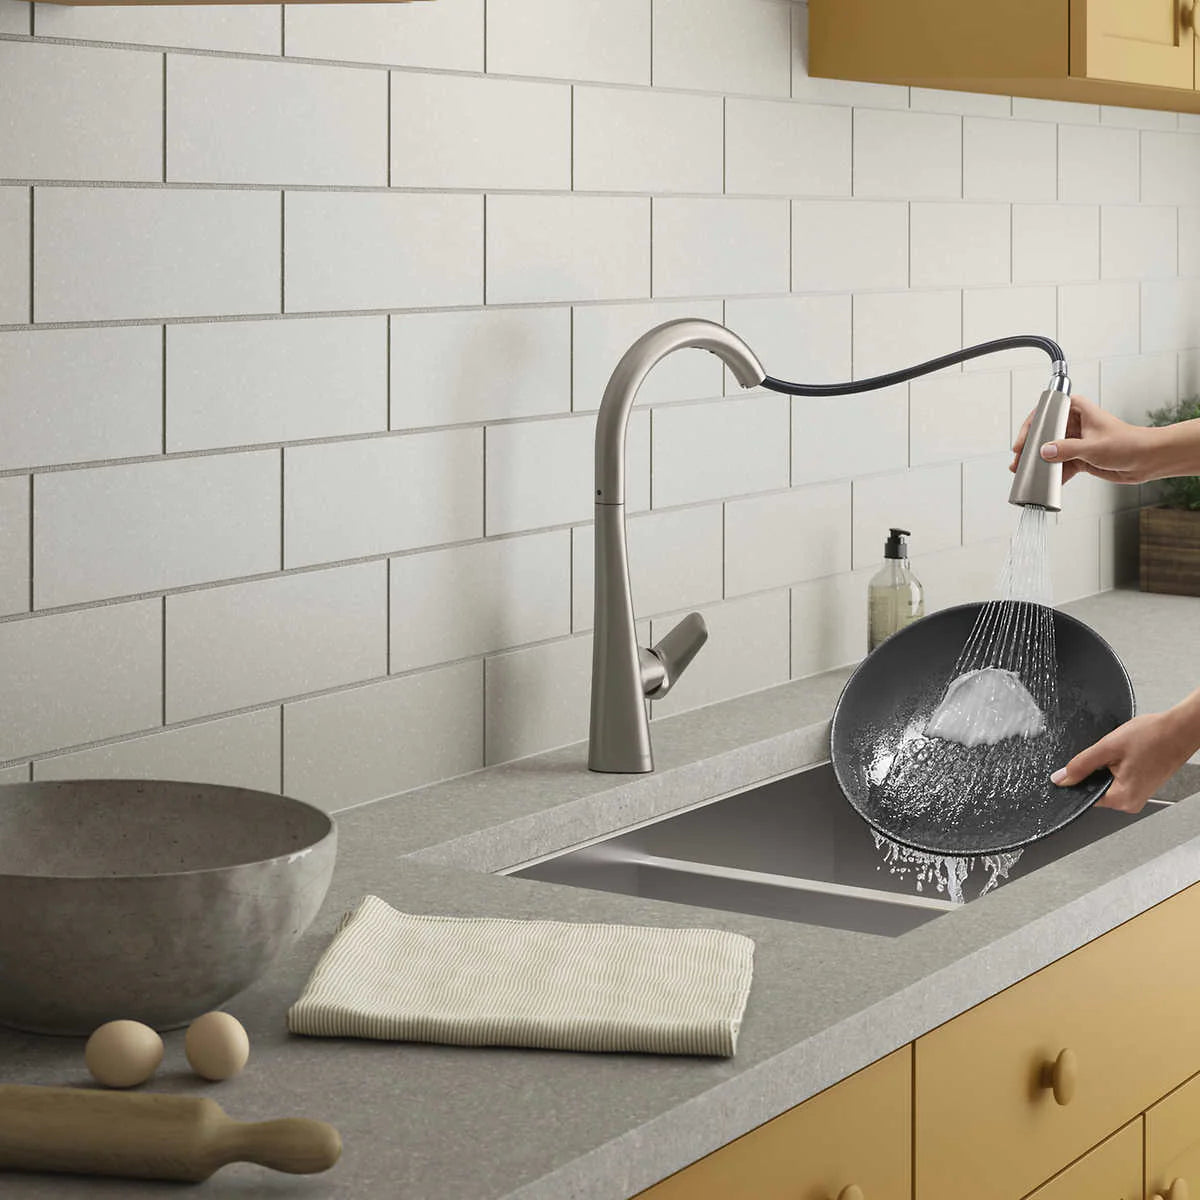 Kohler-robinet-cuisine-sans-contact-anessia-touchless-pull-down-kitchen-faucet-3